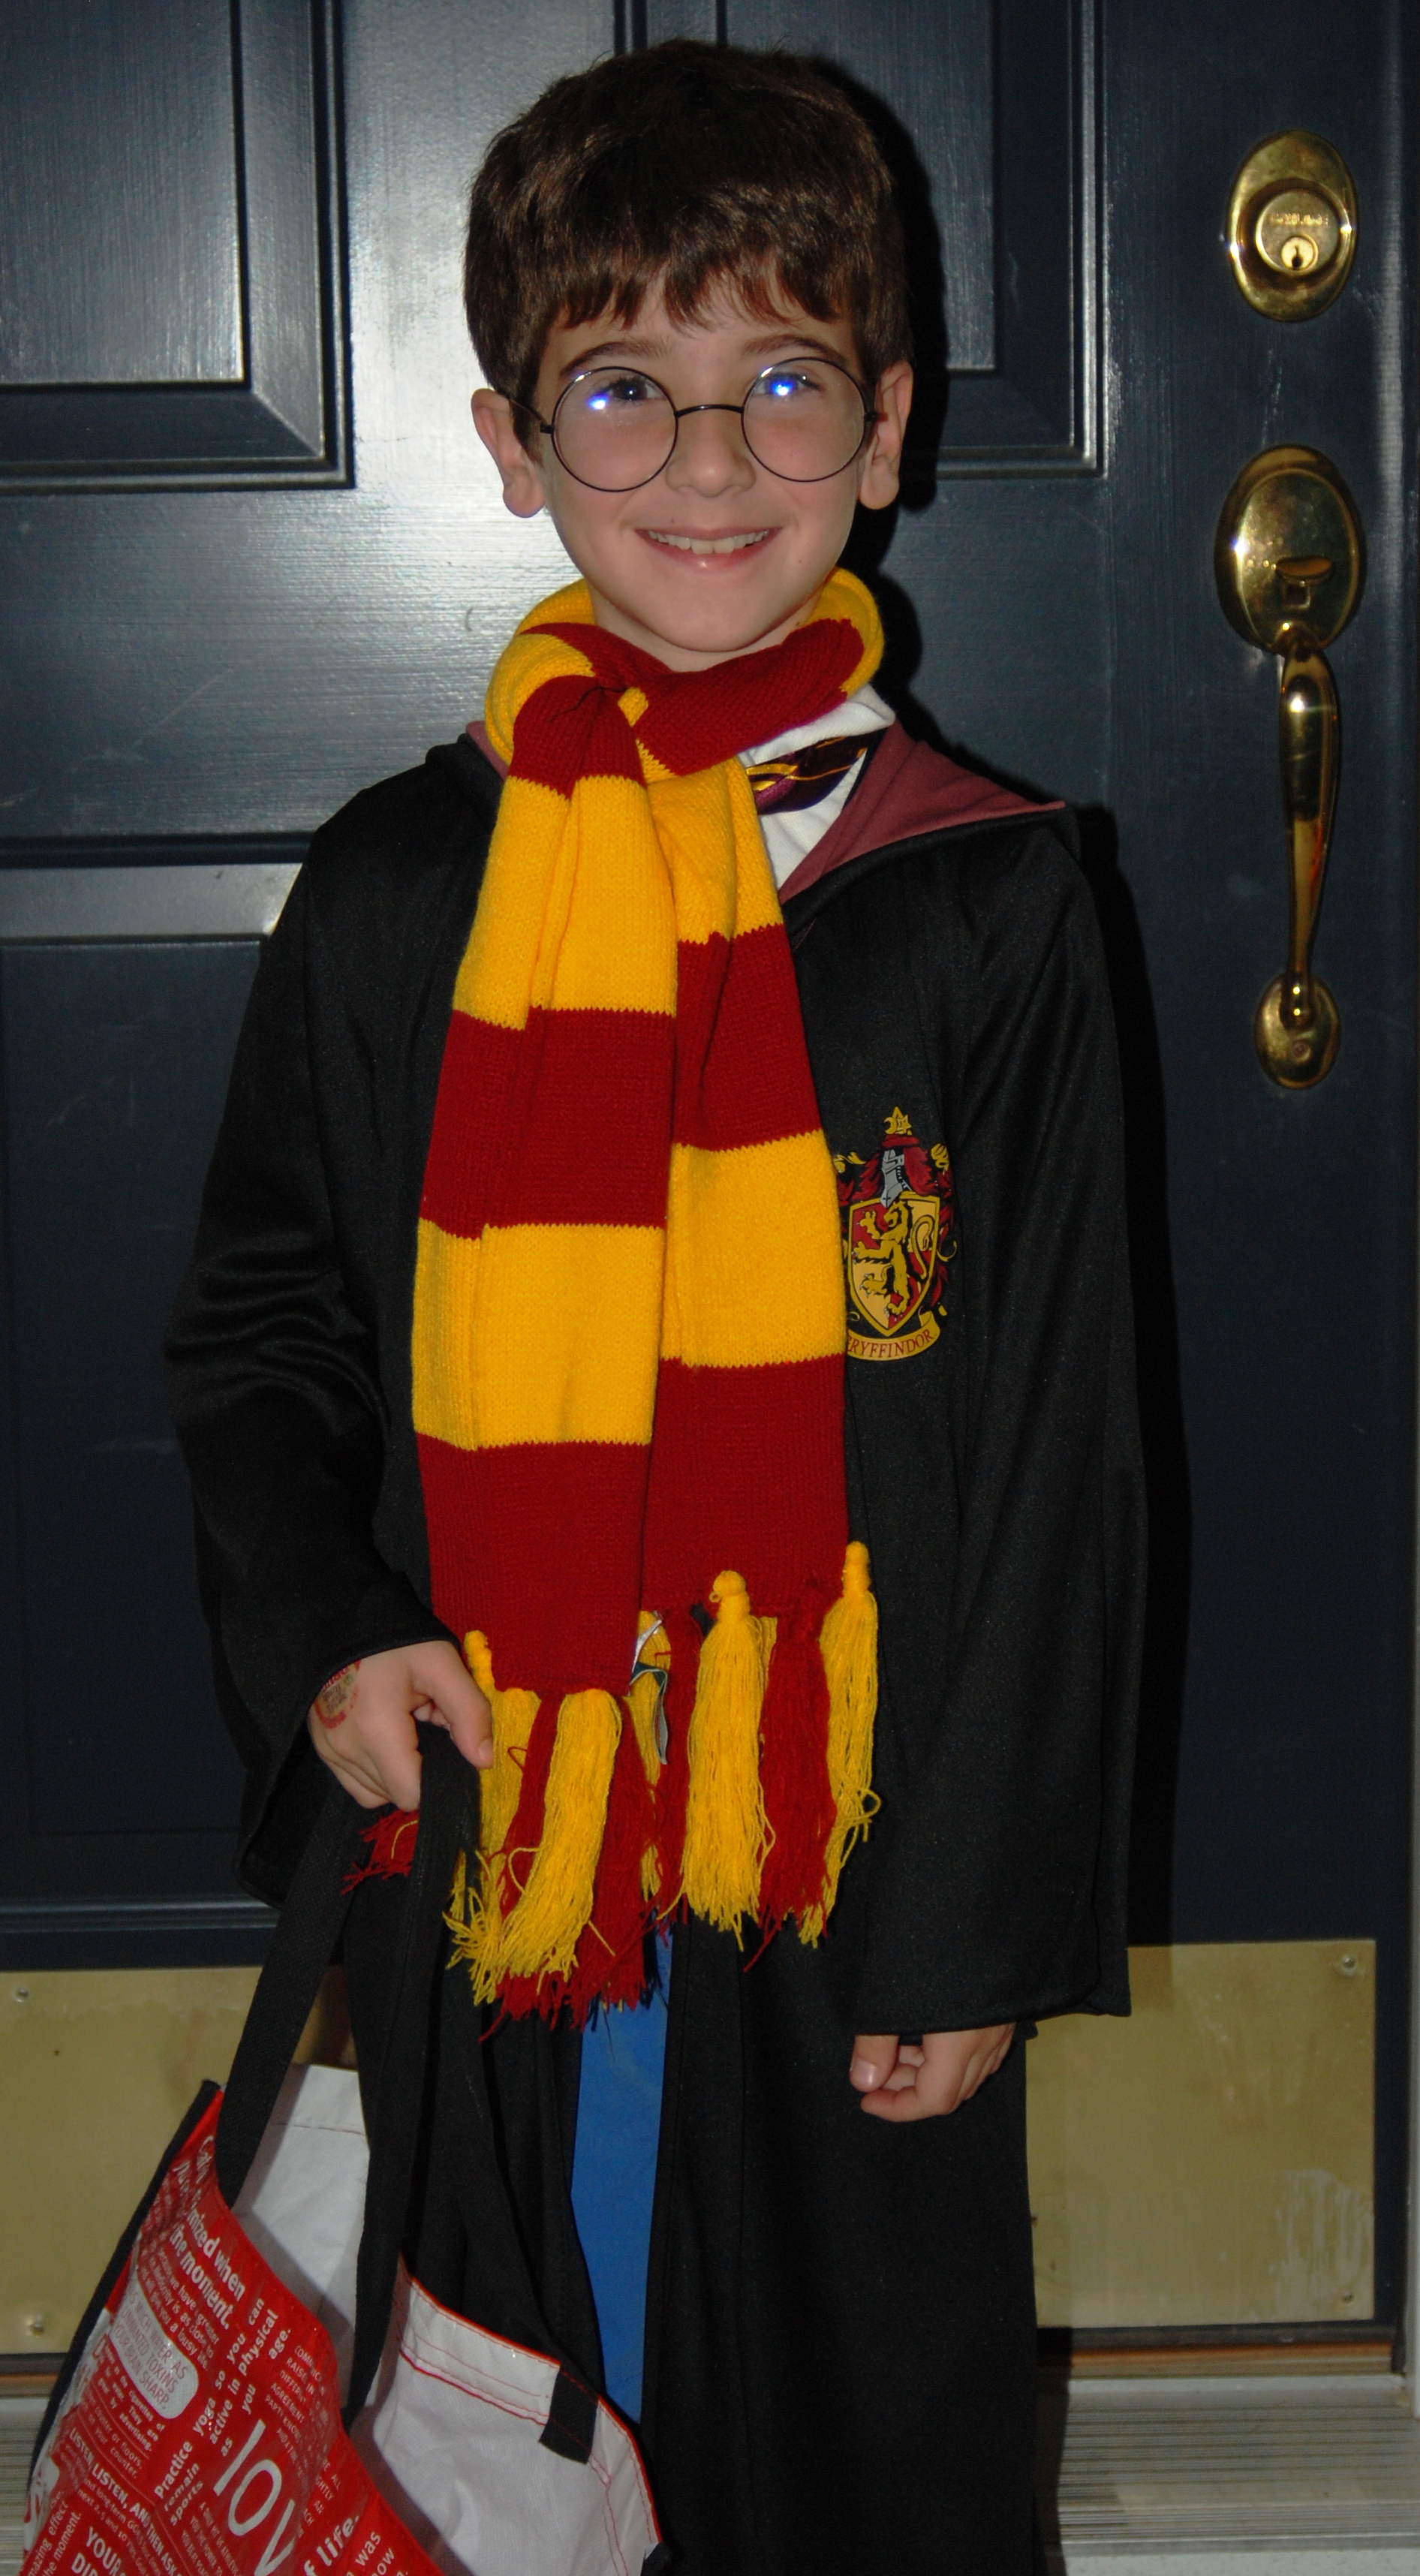 David as Harry Potter.  Do you know any spells to double your amount of candy?